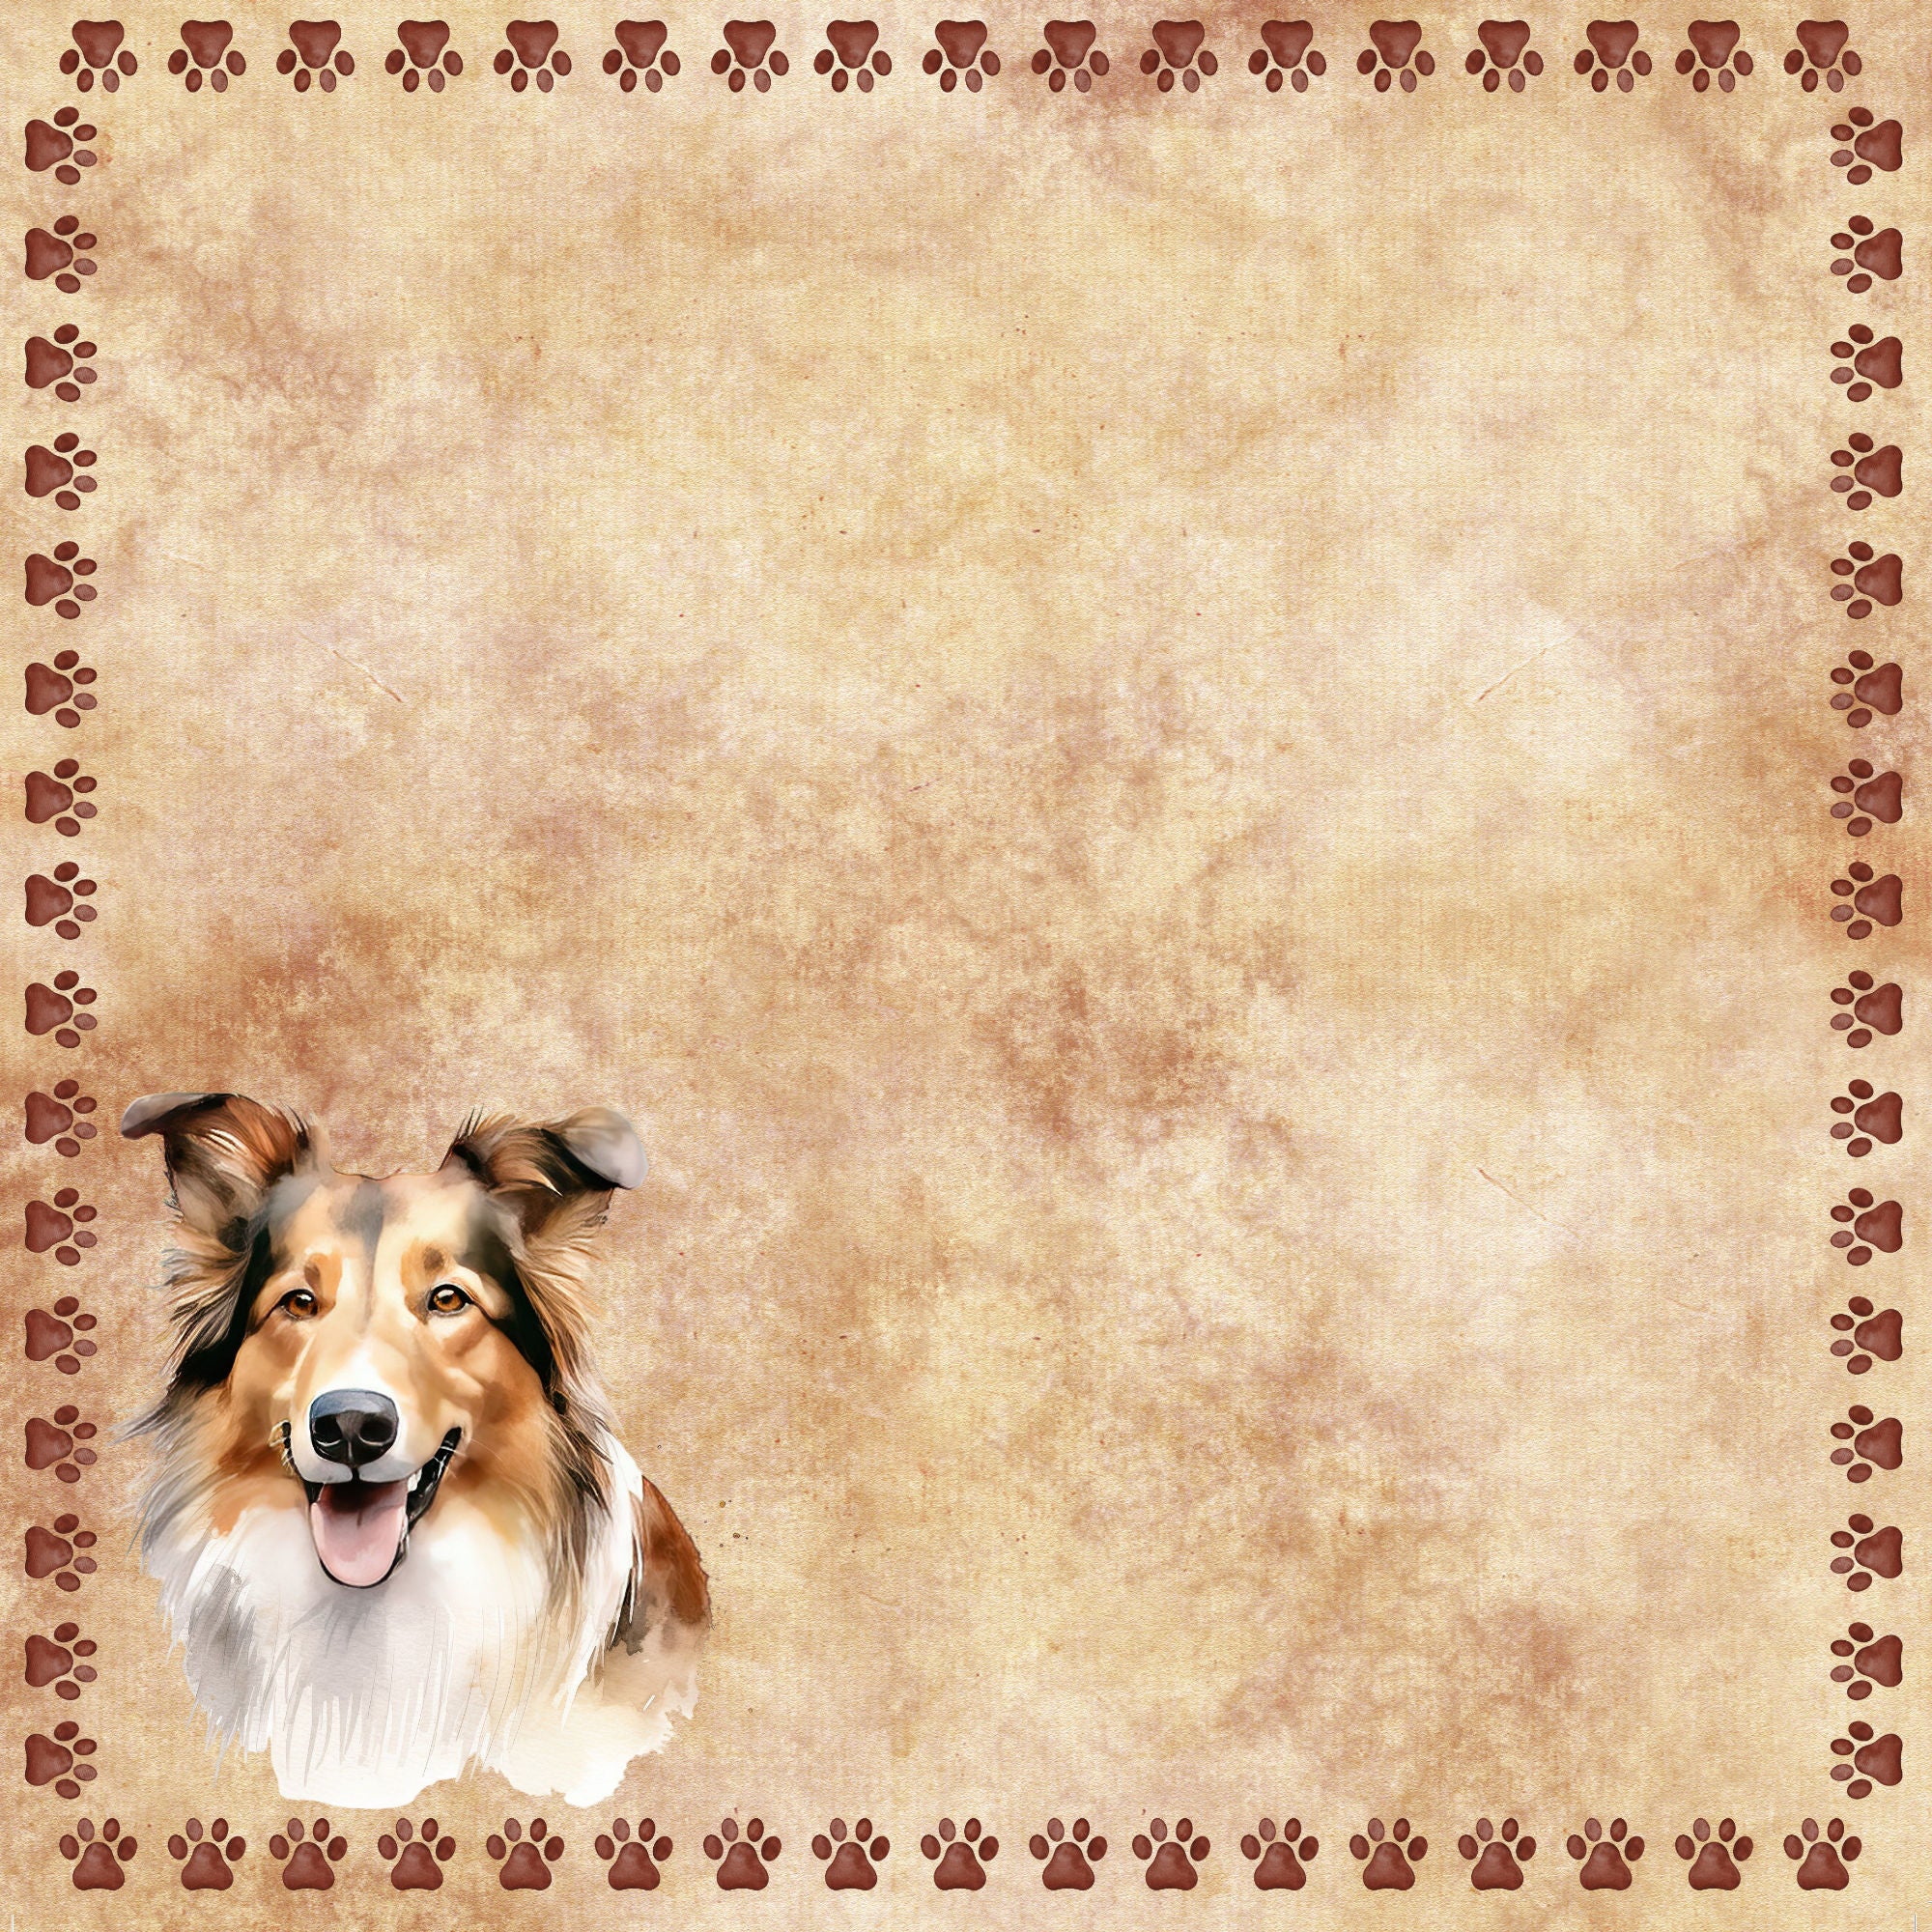 Dog Breeds Collection Collie 12 x 12 Double-Sided Scrapbook Paper by SSC Designs